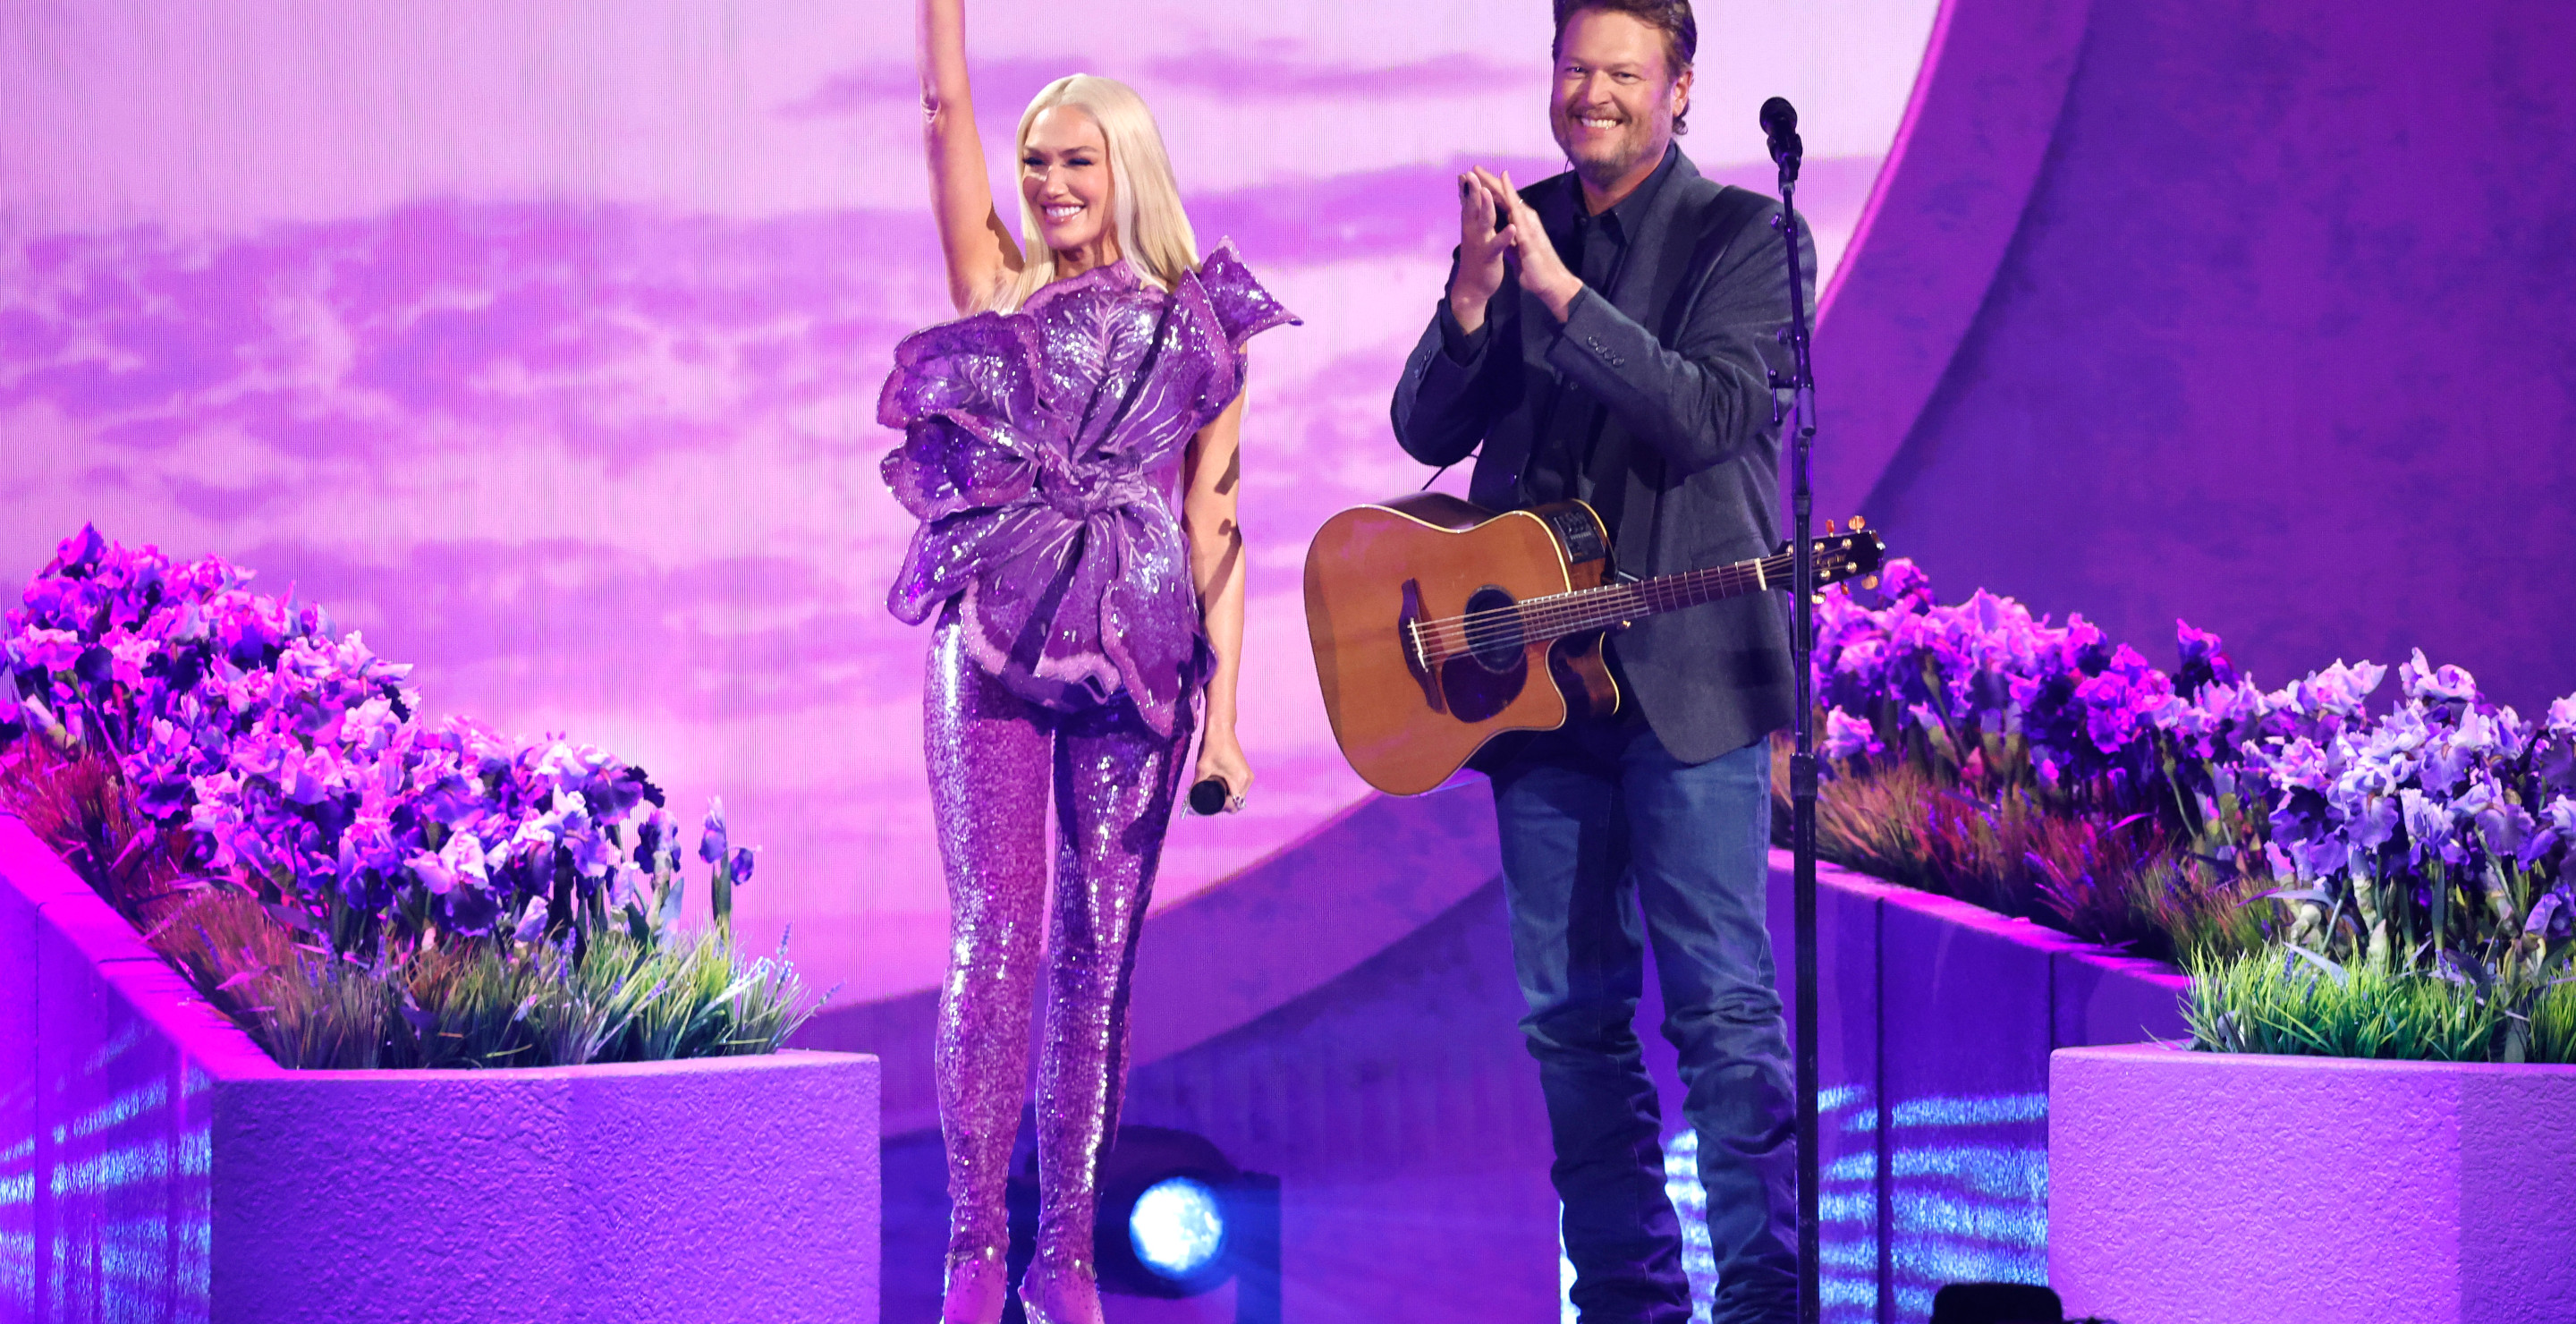 ACM Awards Viewers Roast Gwen Stefani For Wild Outfit Choice